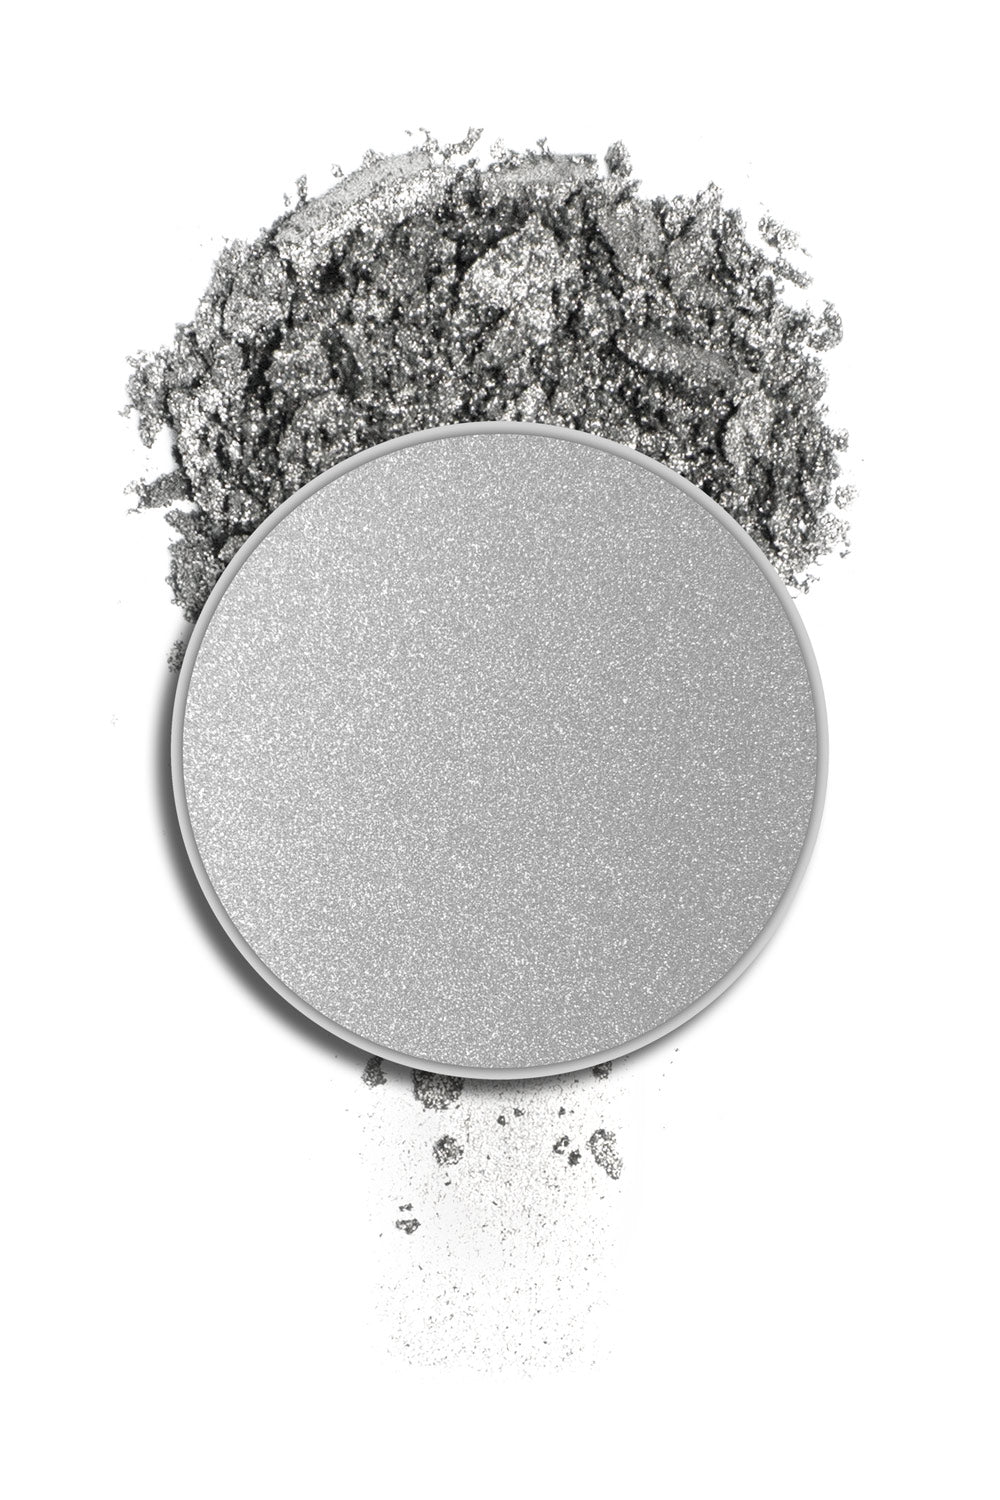 Natural Duo Eye Shadow Compact. Perfect for Cheer Makeup Kits and Dance Makeup  Kits especially when the cheerleaders or dancers have multiple costume  changes. Matte stage makeup is easy to use and